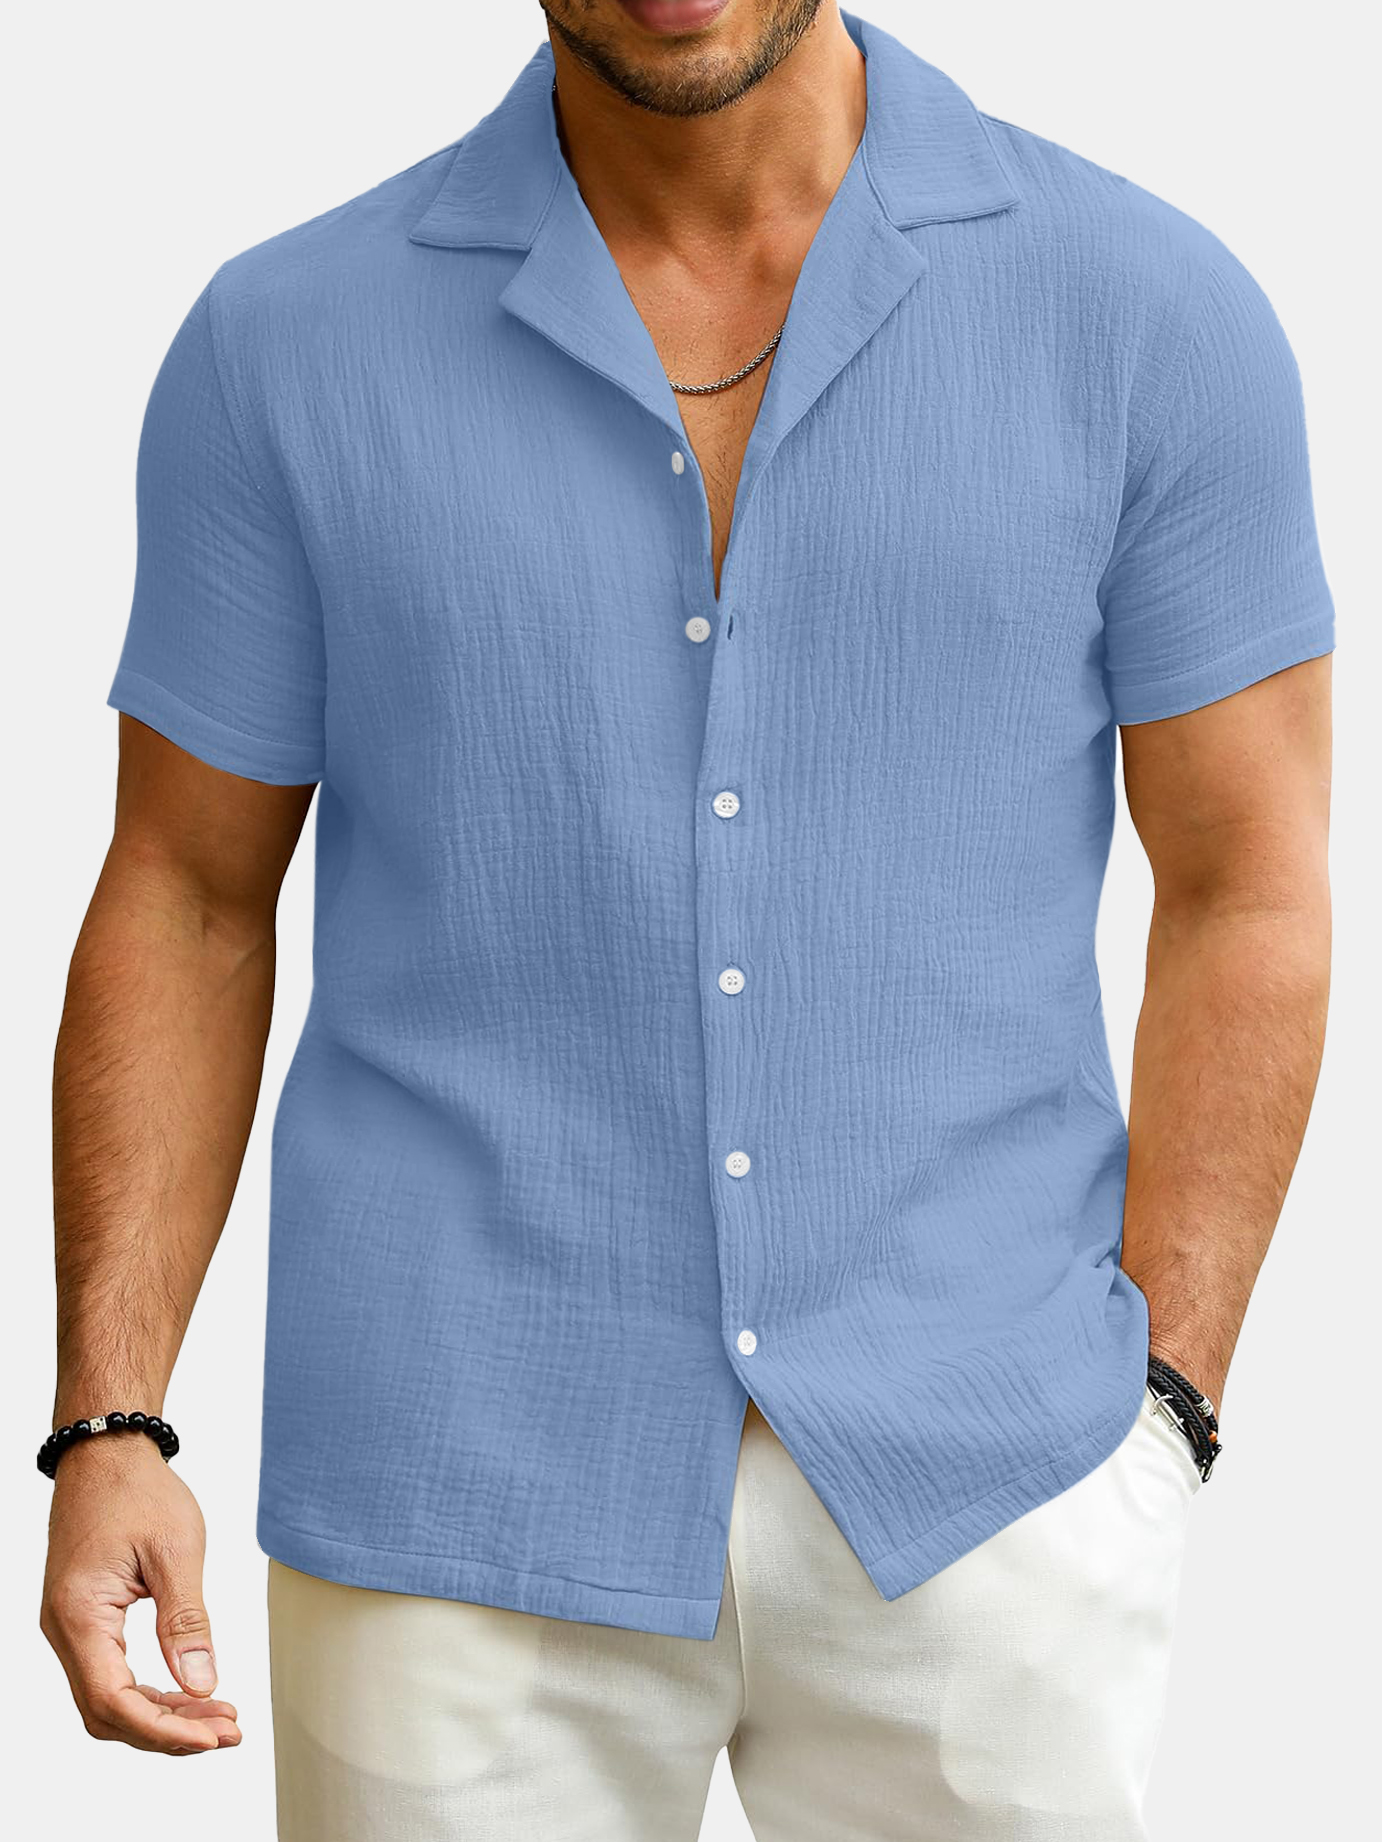 Men's Simple Solid Color Puff Wrinkle Comfortable Short-sleeved Shirt